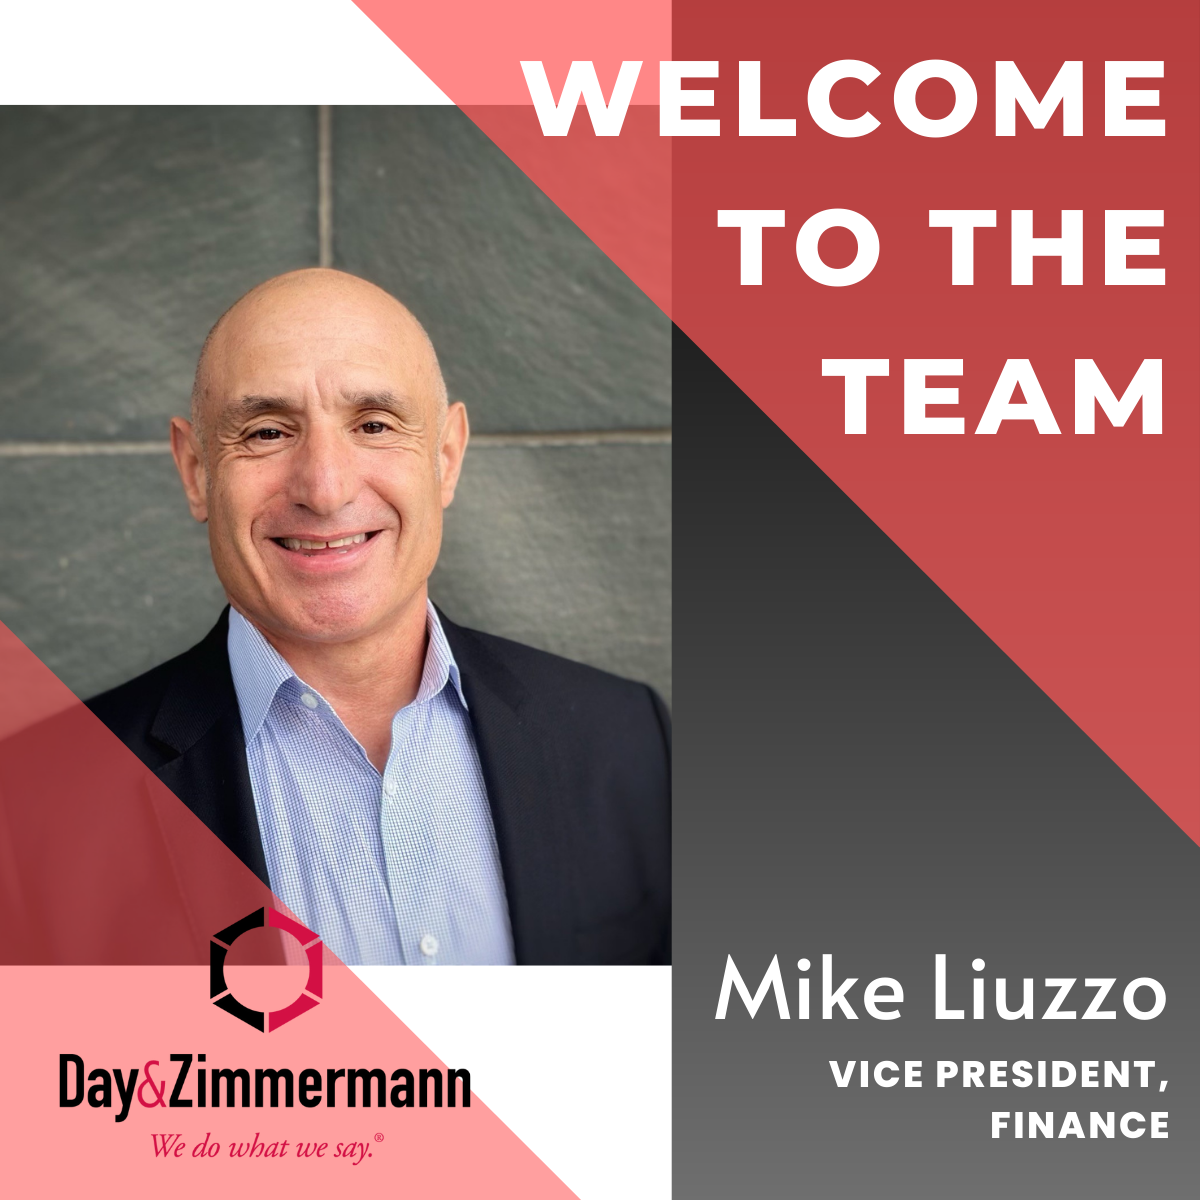 Announcing Mike Liuzzo Joins Government Services as Vice President, Finance